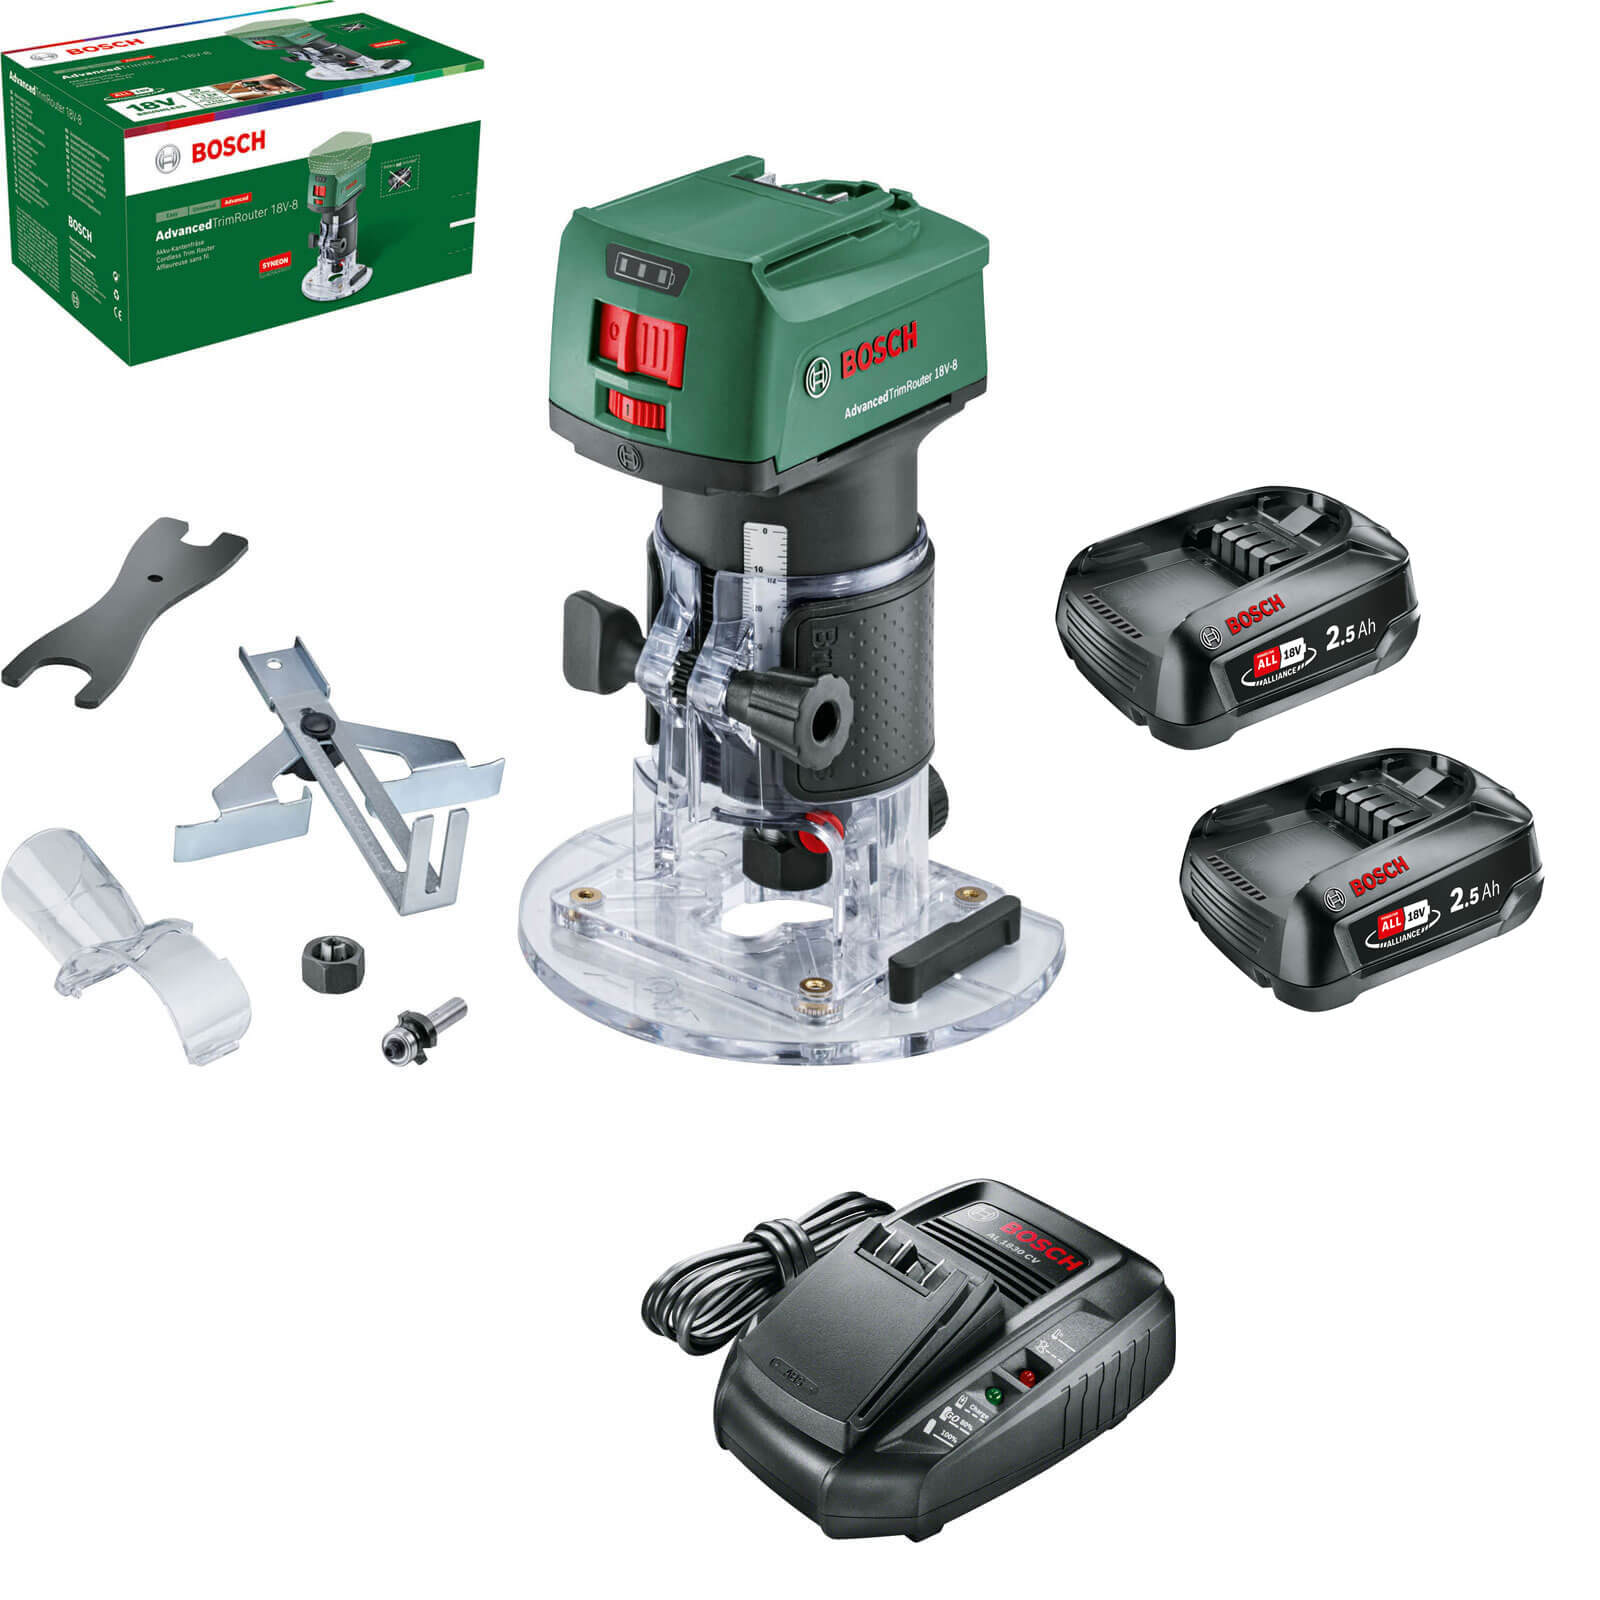 Bosch ADVANCEDTRIMROUTER 18V-8 P4A 18v Cordless Trim Router 2 x 2.5ah Li-ion Charger No Case FREE UK 1/4" Collet Worth £11.95 Extra !